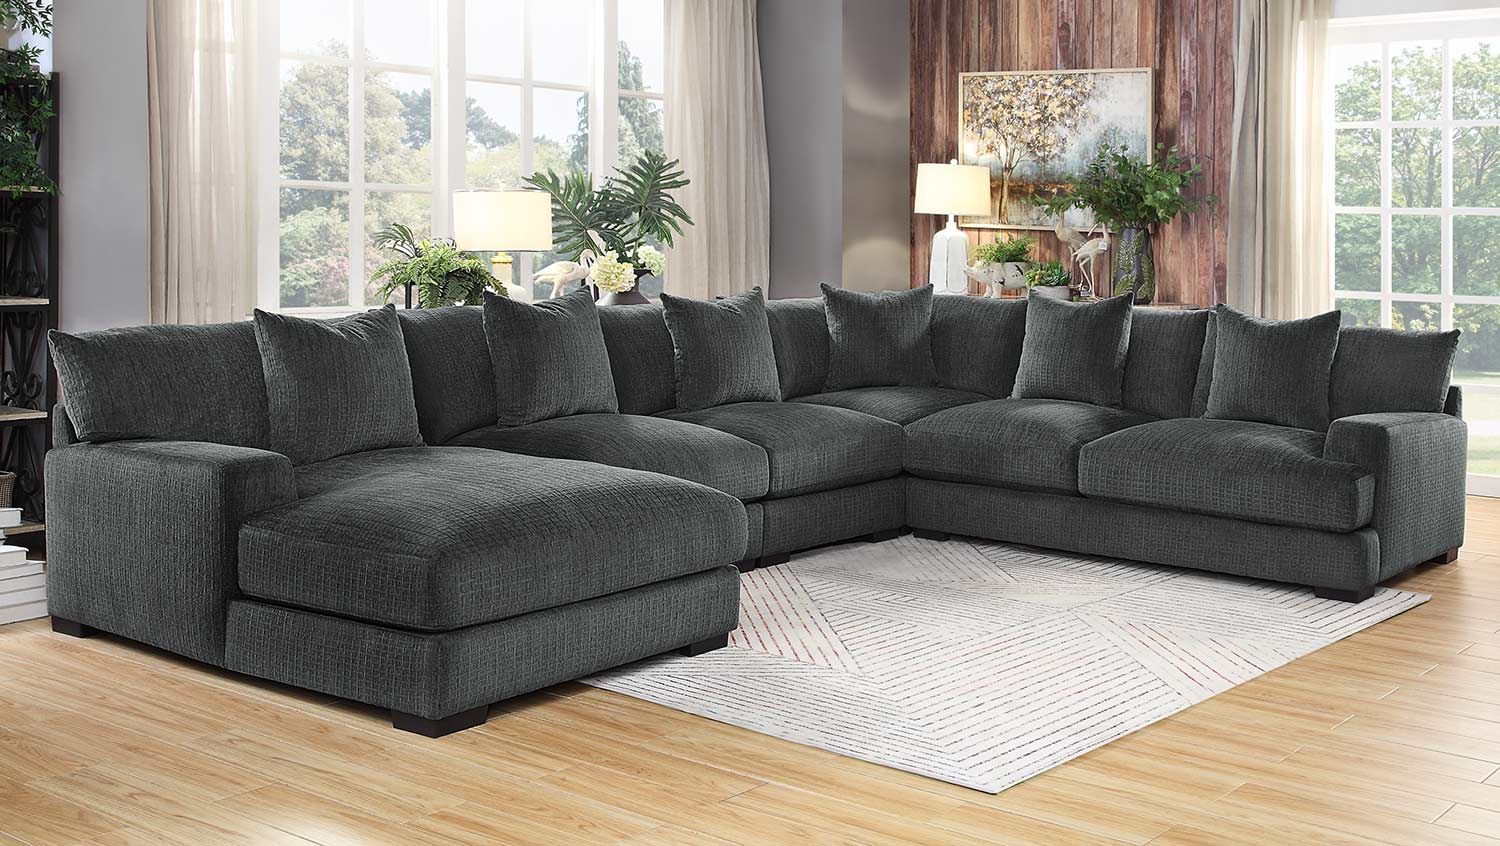 Homelegance Worchester Sectional Sofa Set – Dark Gray 9857Dg Sofa Set |  Homelegance Elegancefurnituredirect Pertaining To Dark Gray Sectional Sofas (Photo 1 of 15)